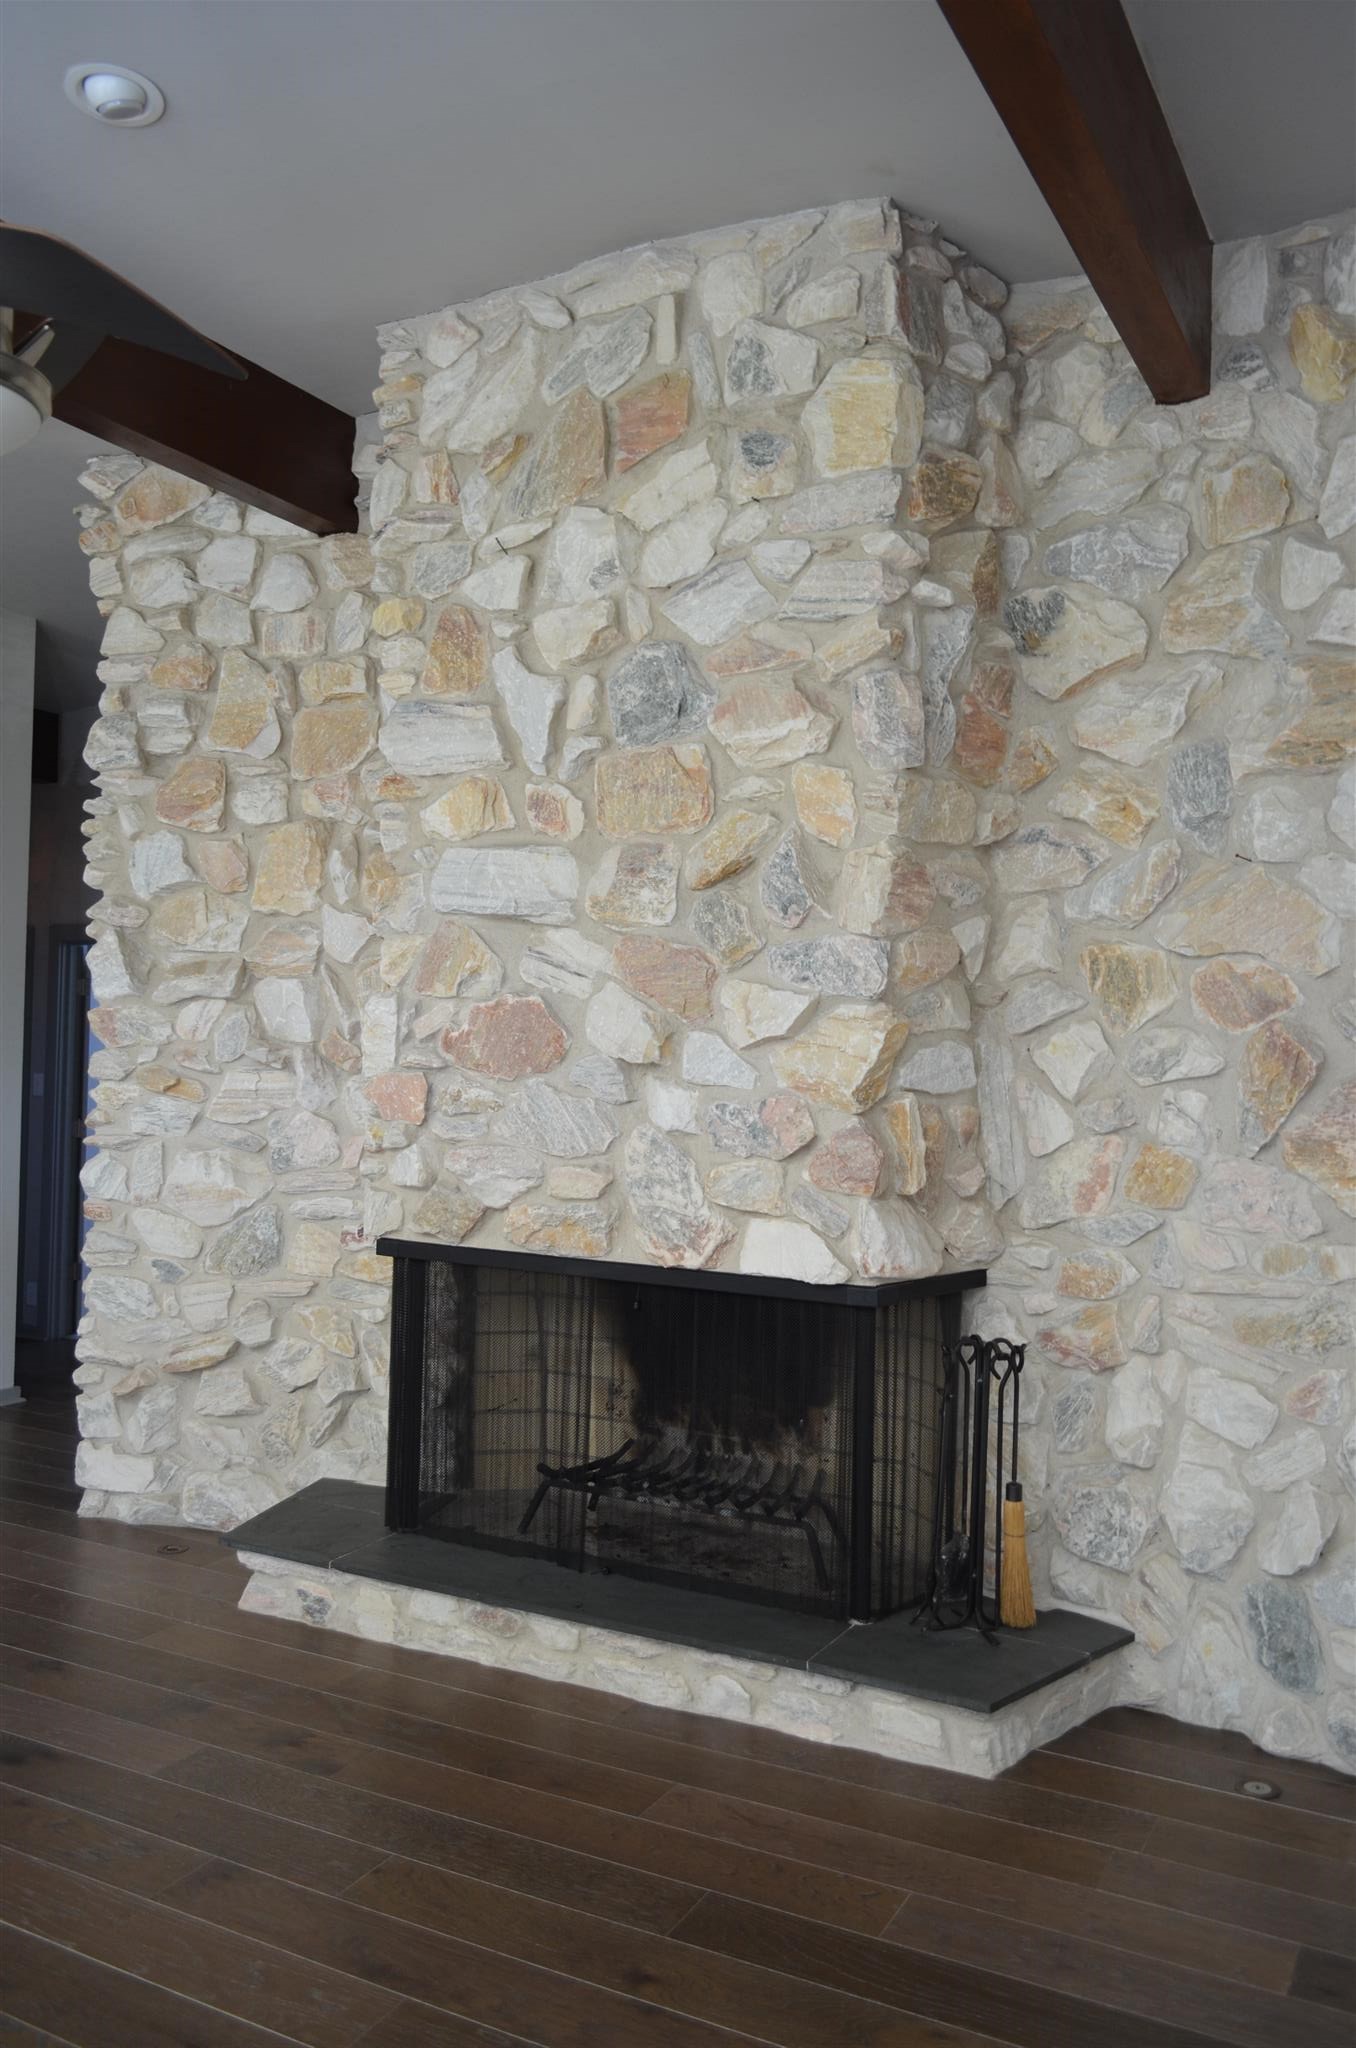 Norwood Fireplace Beautiful 2307 W norwood Drive Muncie In 1737 sold Listing